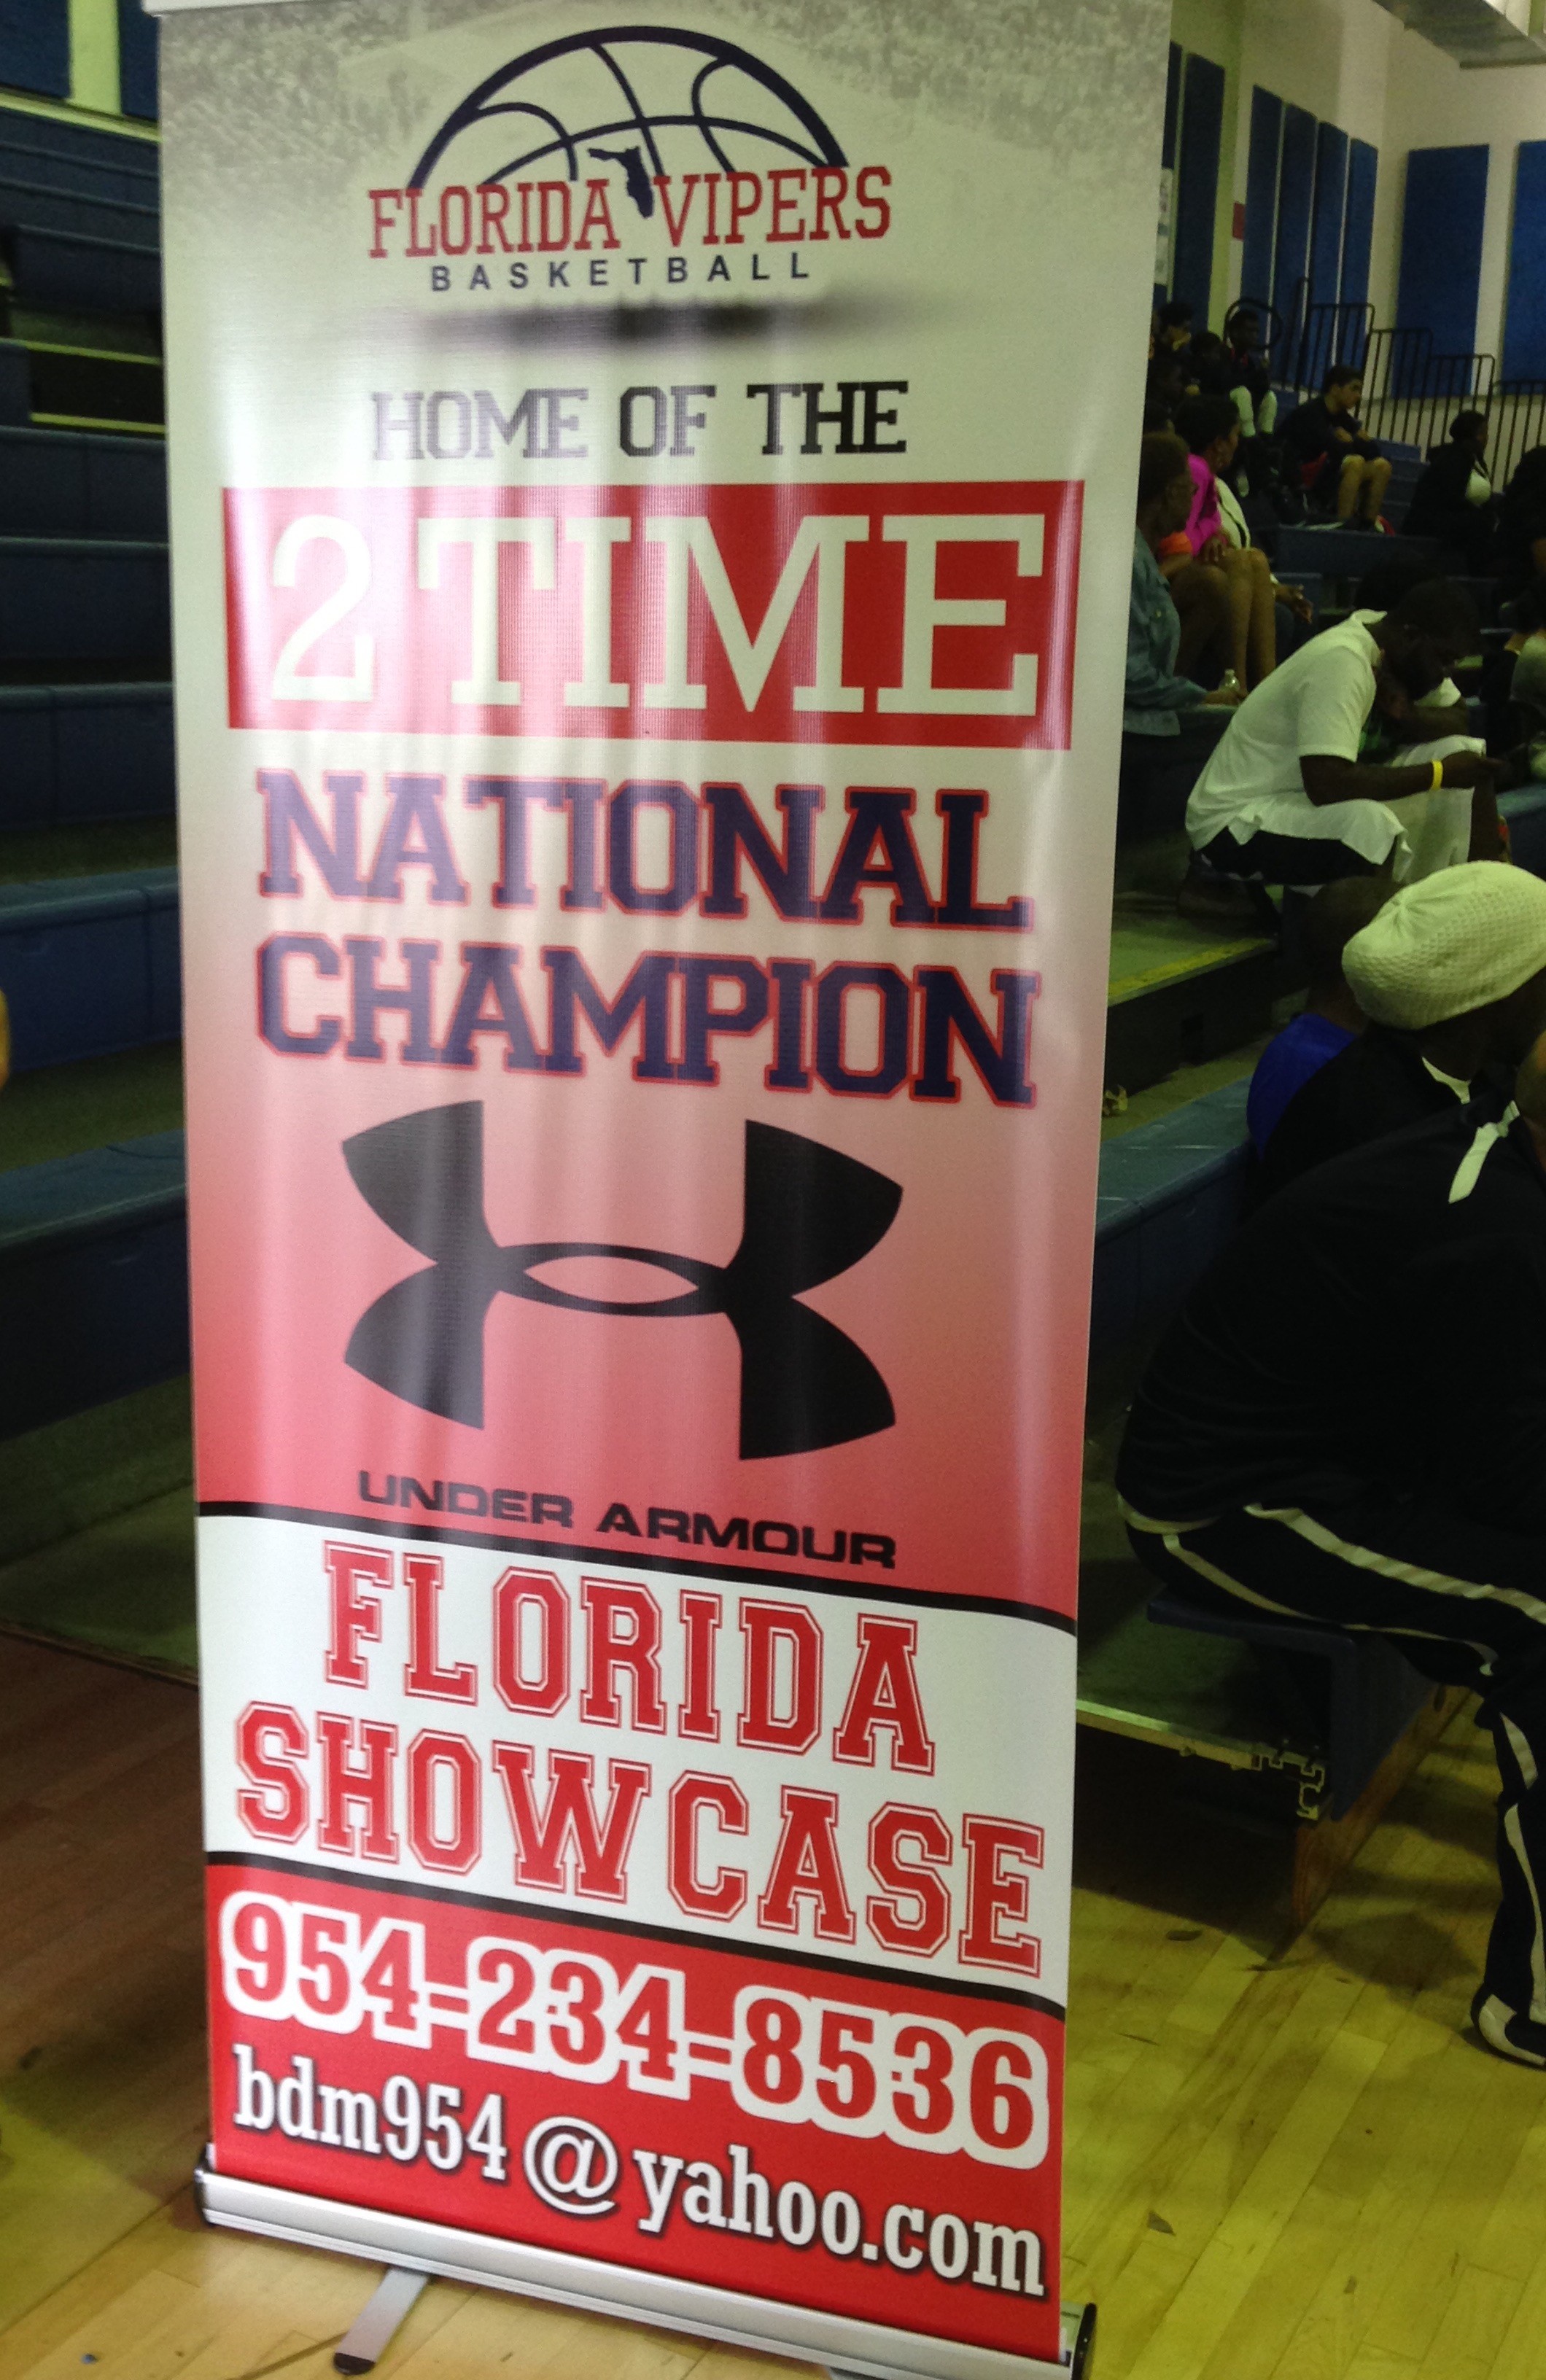 Florida Vipers Under Armour FL Showcase